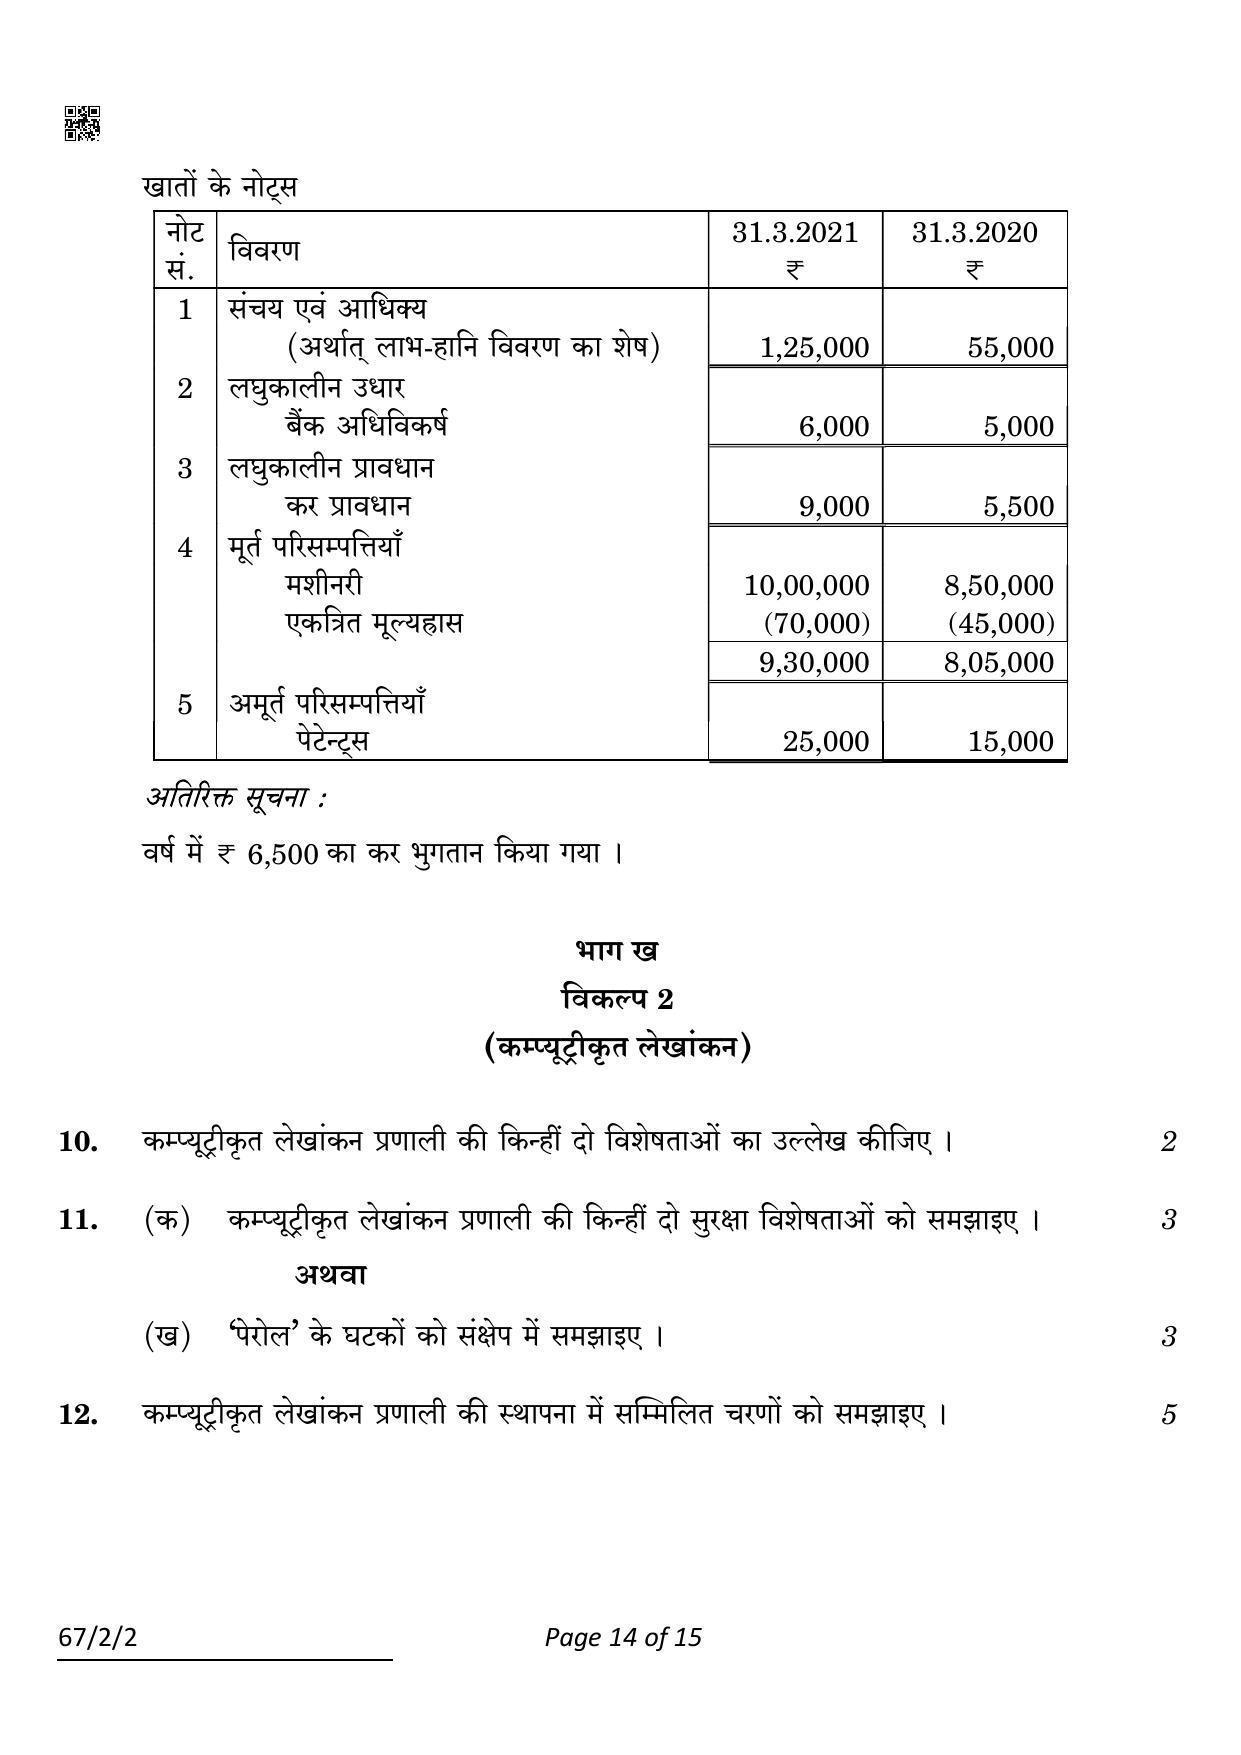 CBSE Class 12 67-2-2 Accountancy 2022 Question Paper - Page 14